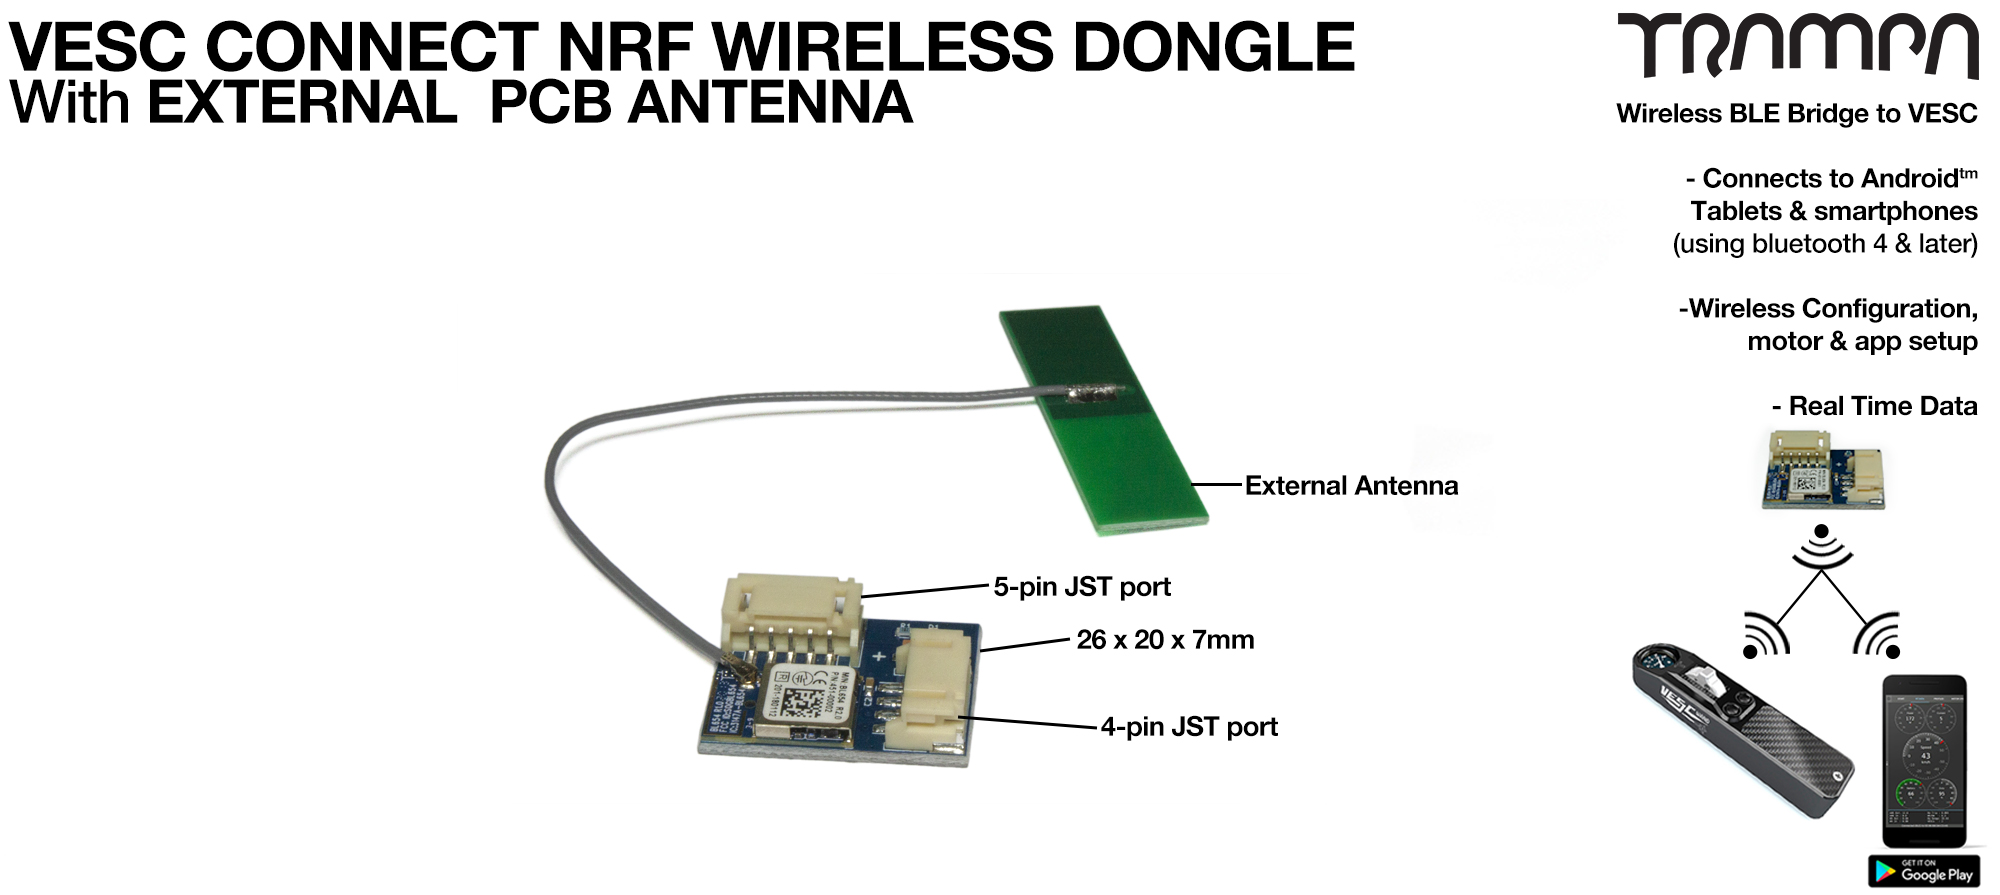 VESC Connect NRF Dongle with EXTERNAL PCB Antenna 